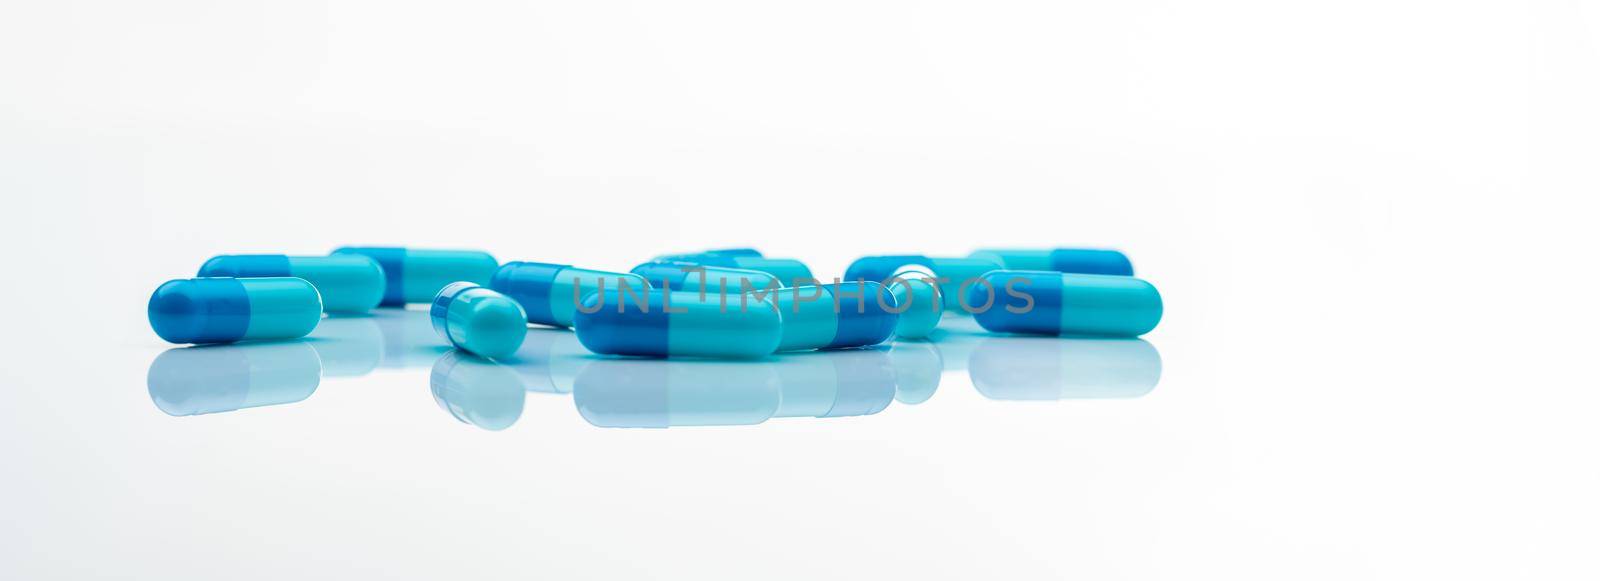 Blue antibiotic capsule pills spread on white background. Antibiotic drug resistance. Pharmaceutical industry. Healthcare and medicine concept. Health budget concept. Capsule manufacturing industry. by Fahroni